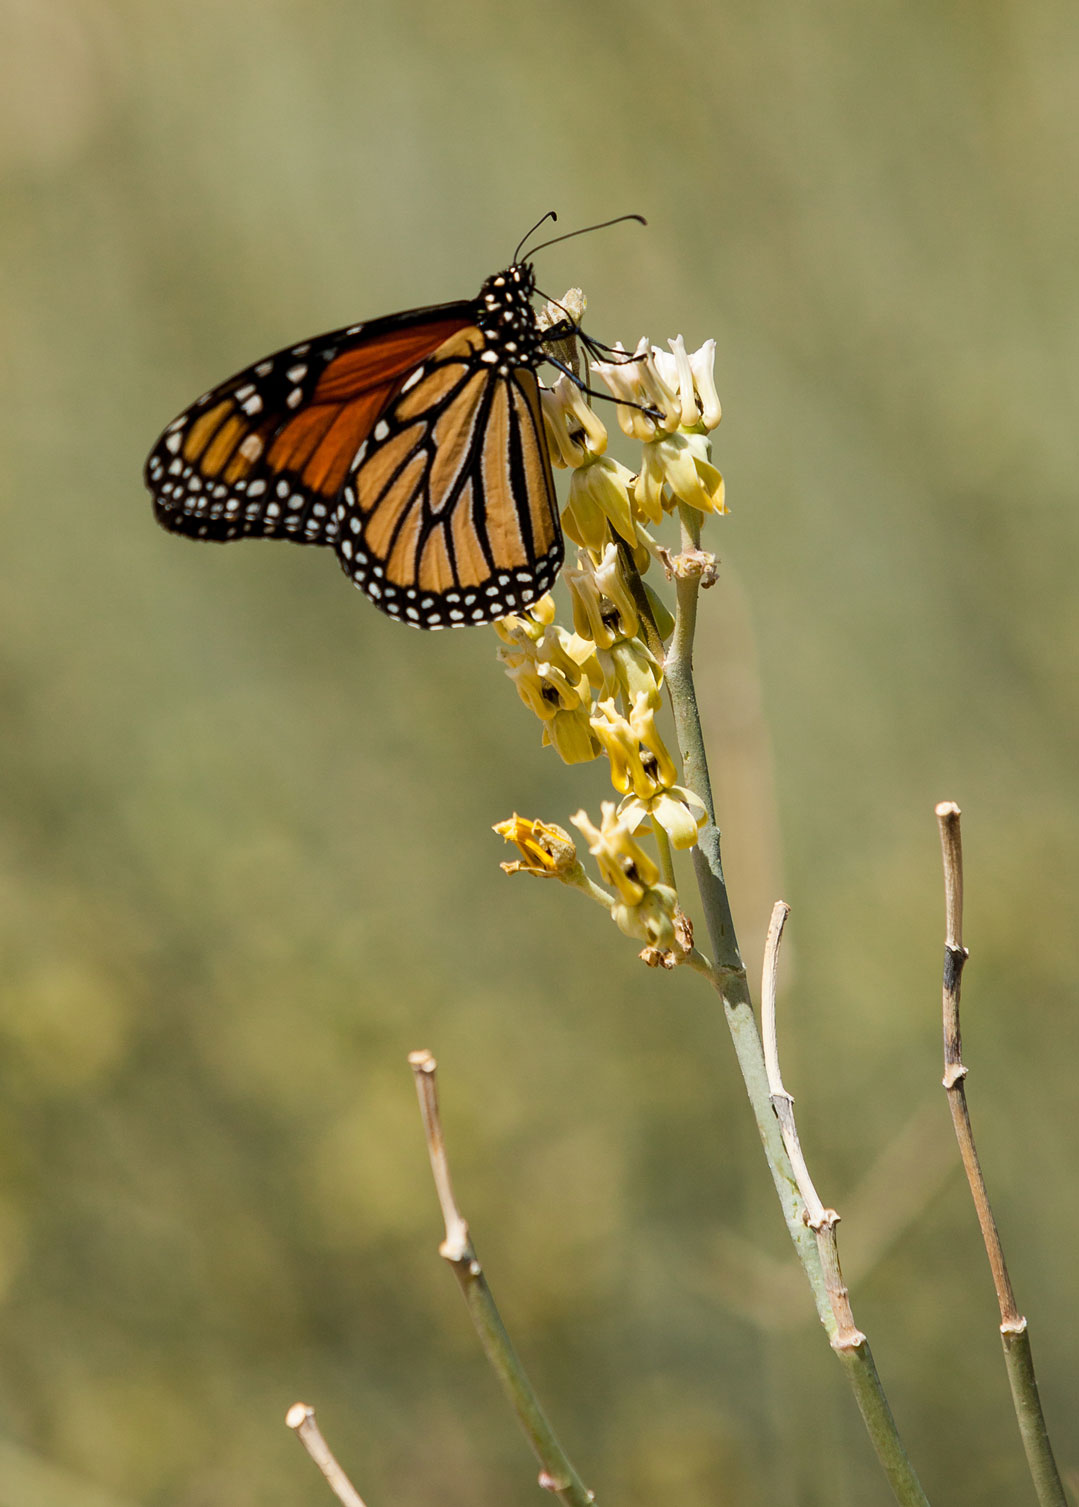 A Monarch butterfly perched on a flower of the Desert Milkweed.